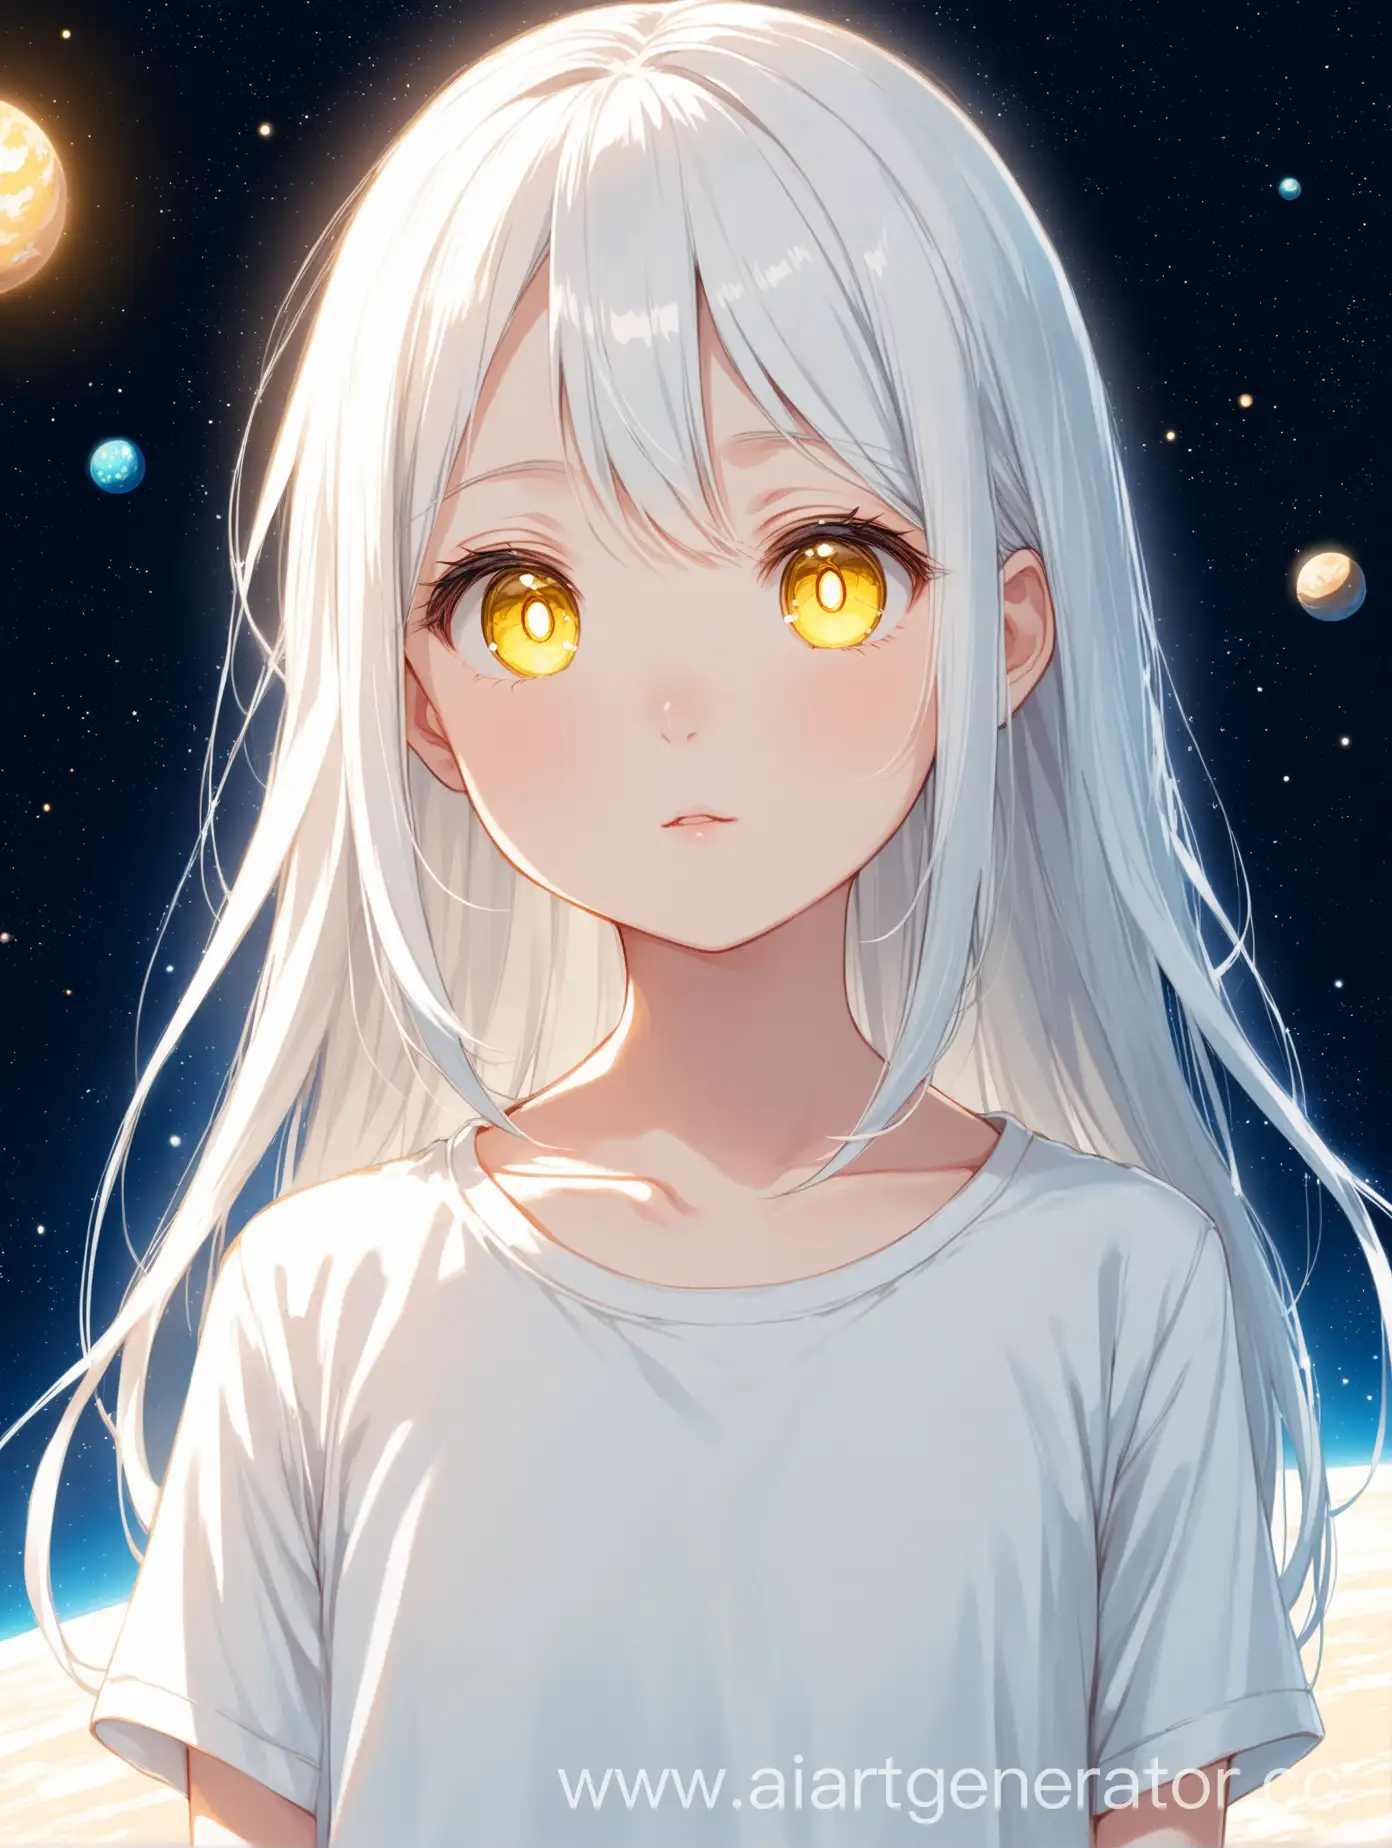 Serene-Anime-Girl-with-Long-White-Hair-in-Space-Background